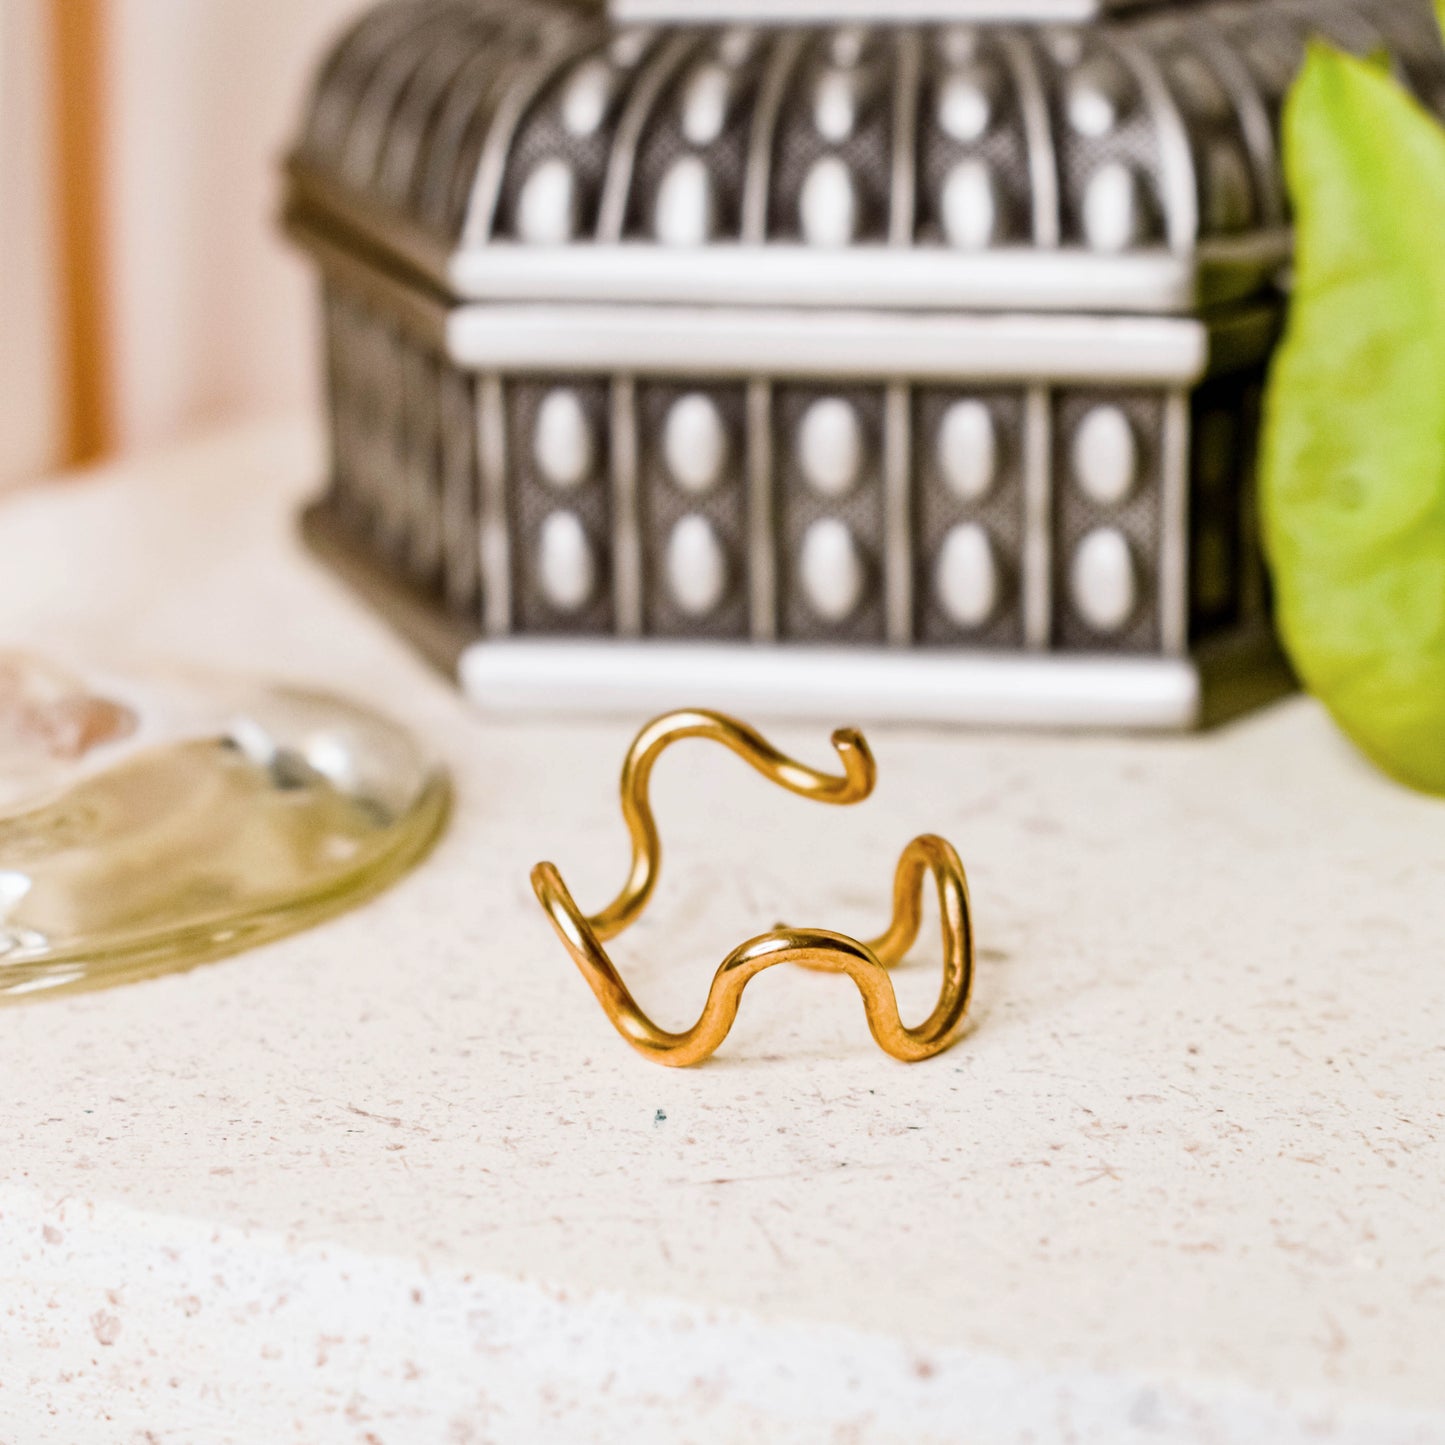 The Squiggle Ring